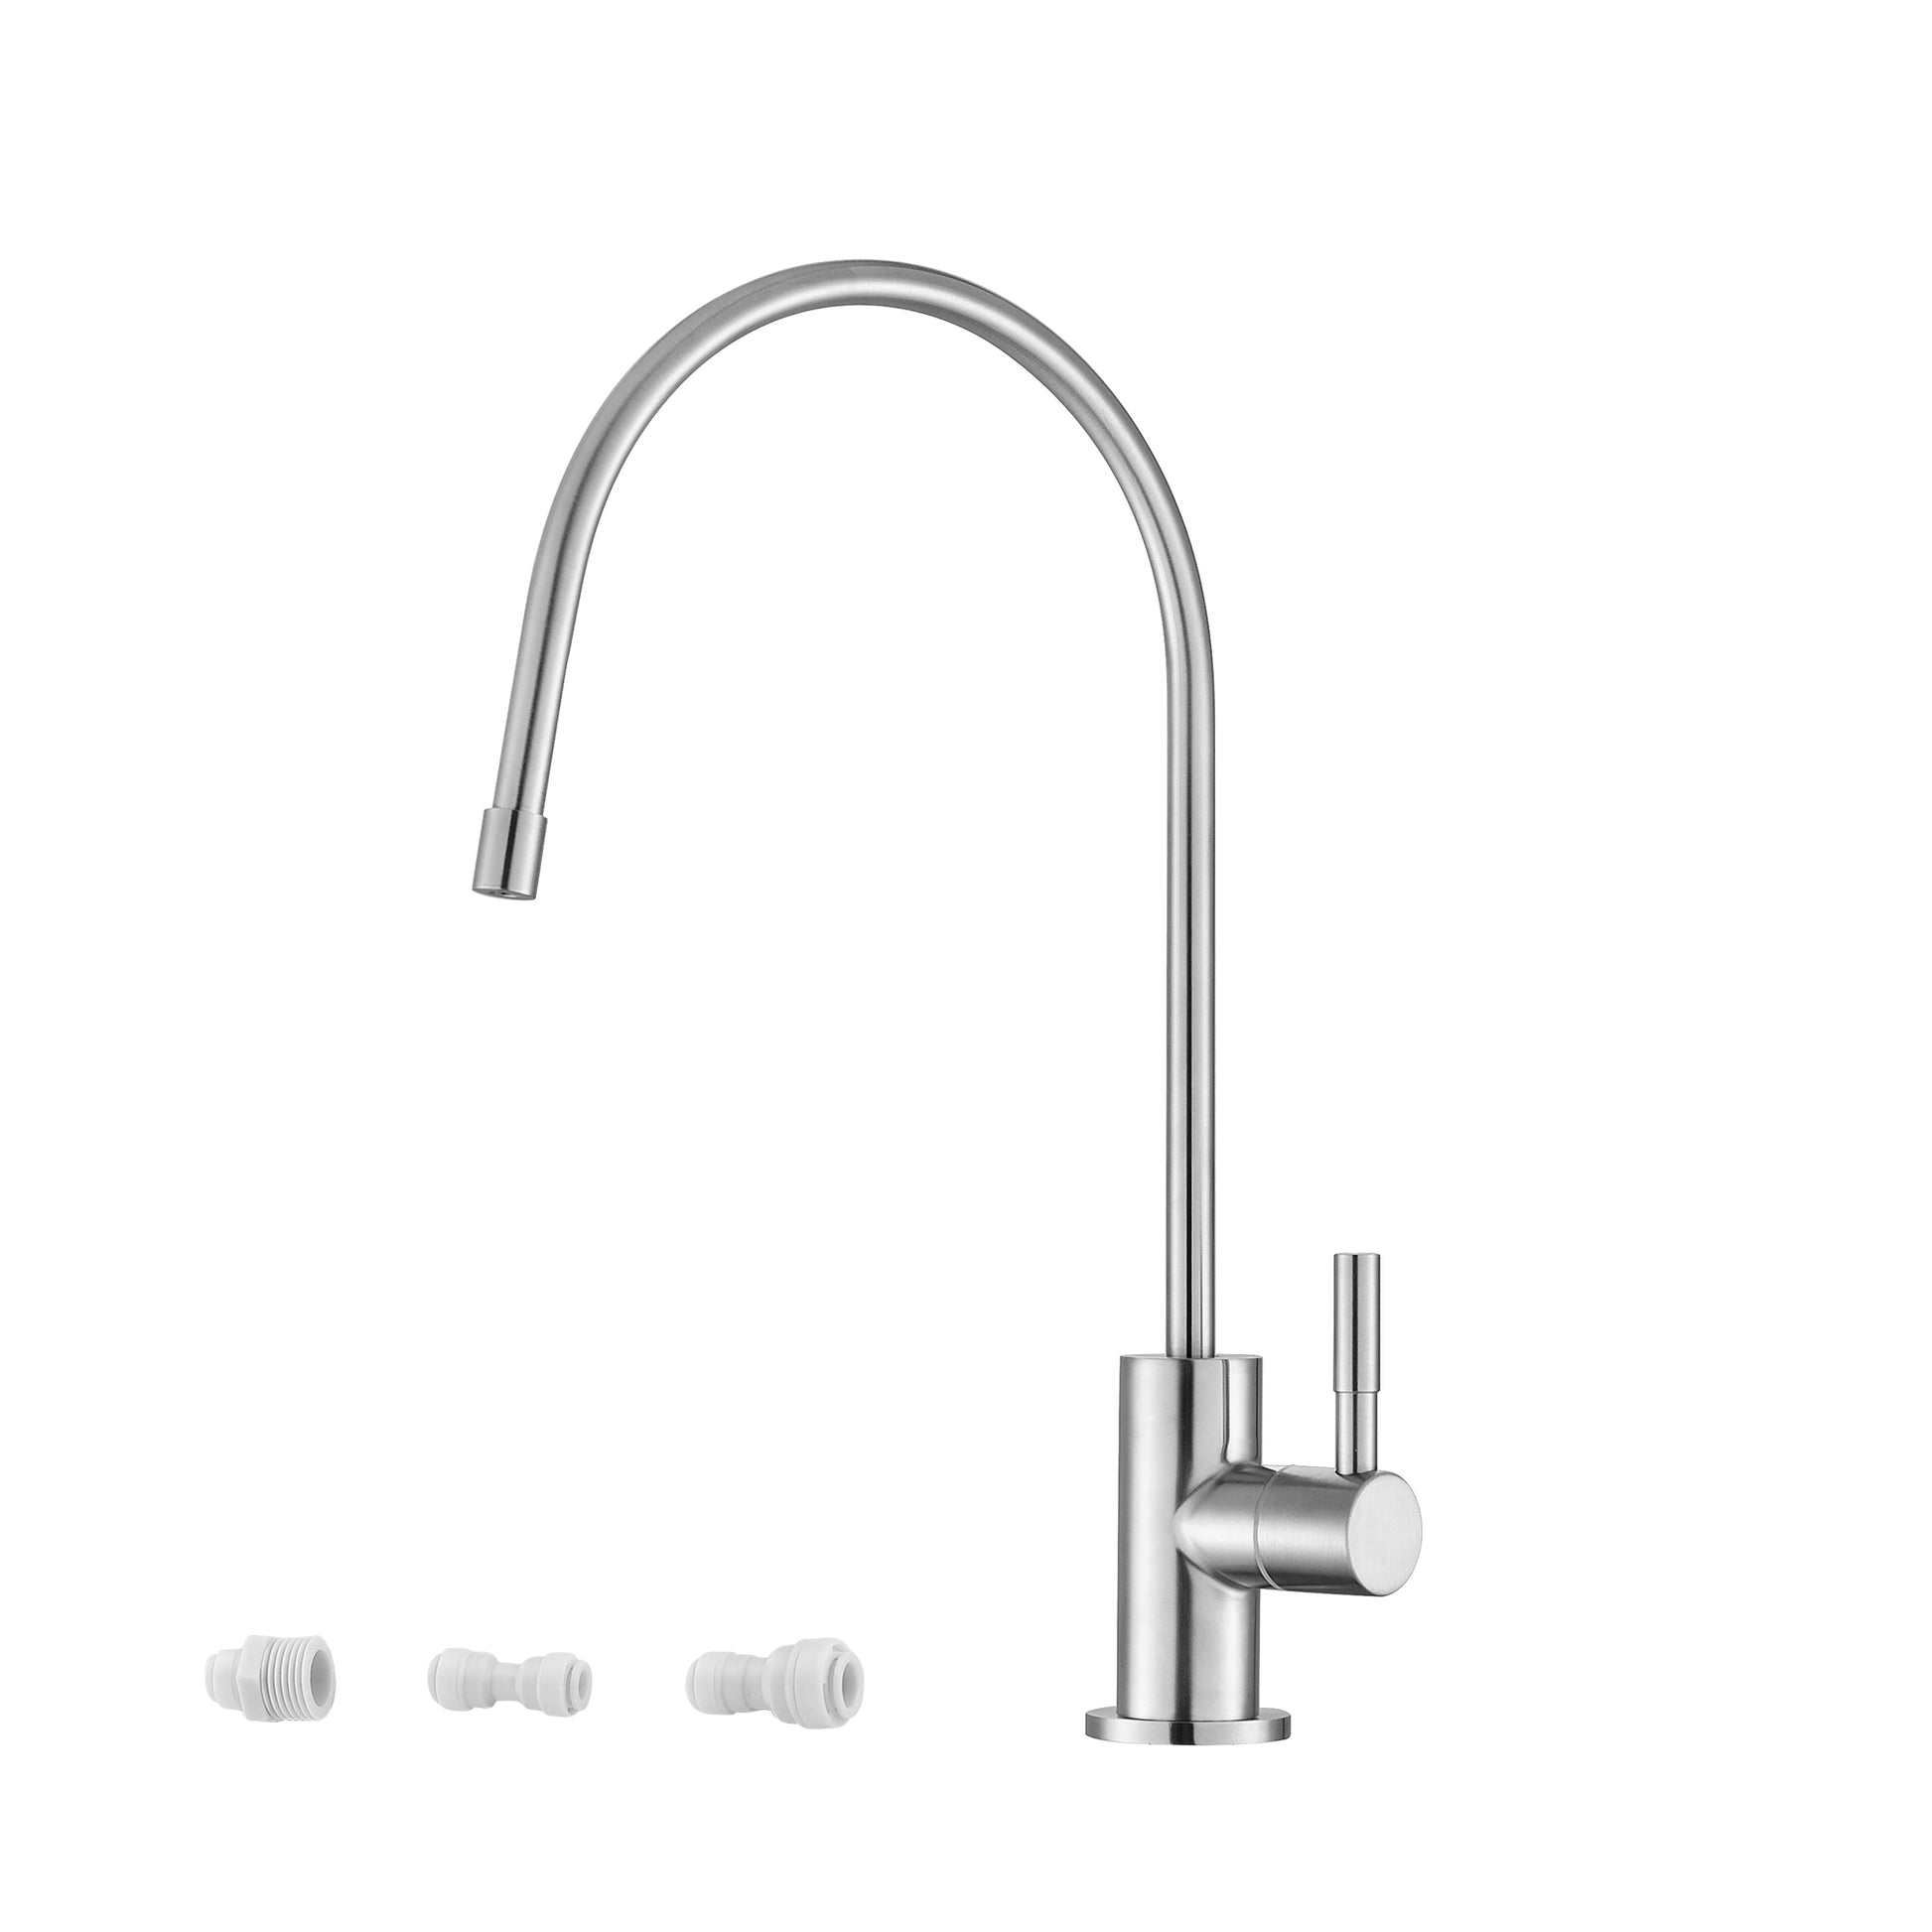 Lead Free Drinking Water Faucet,Brushed Nickel